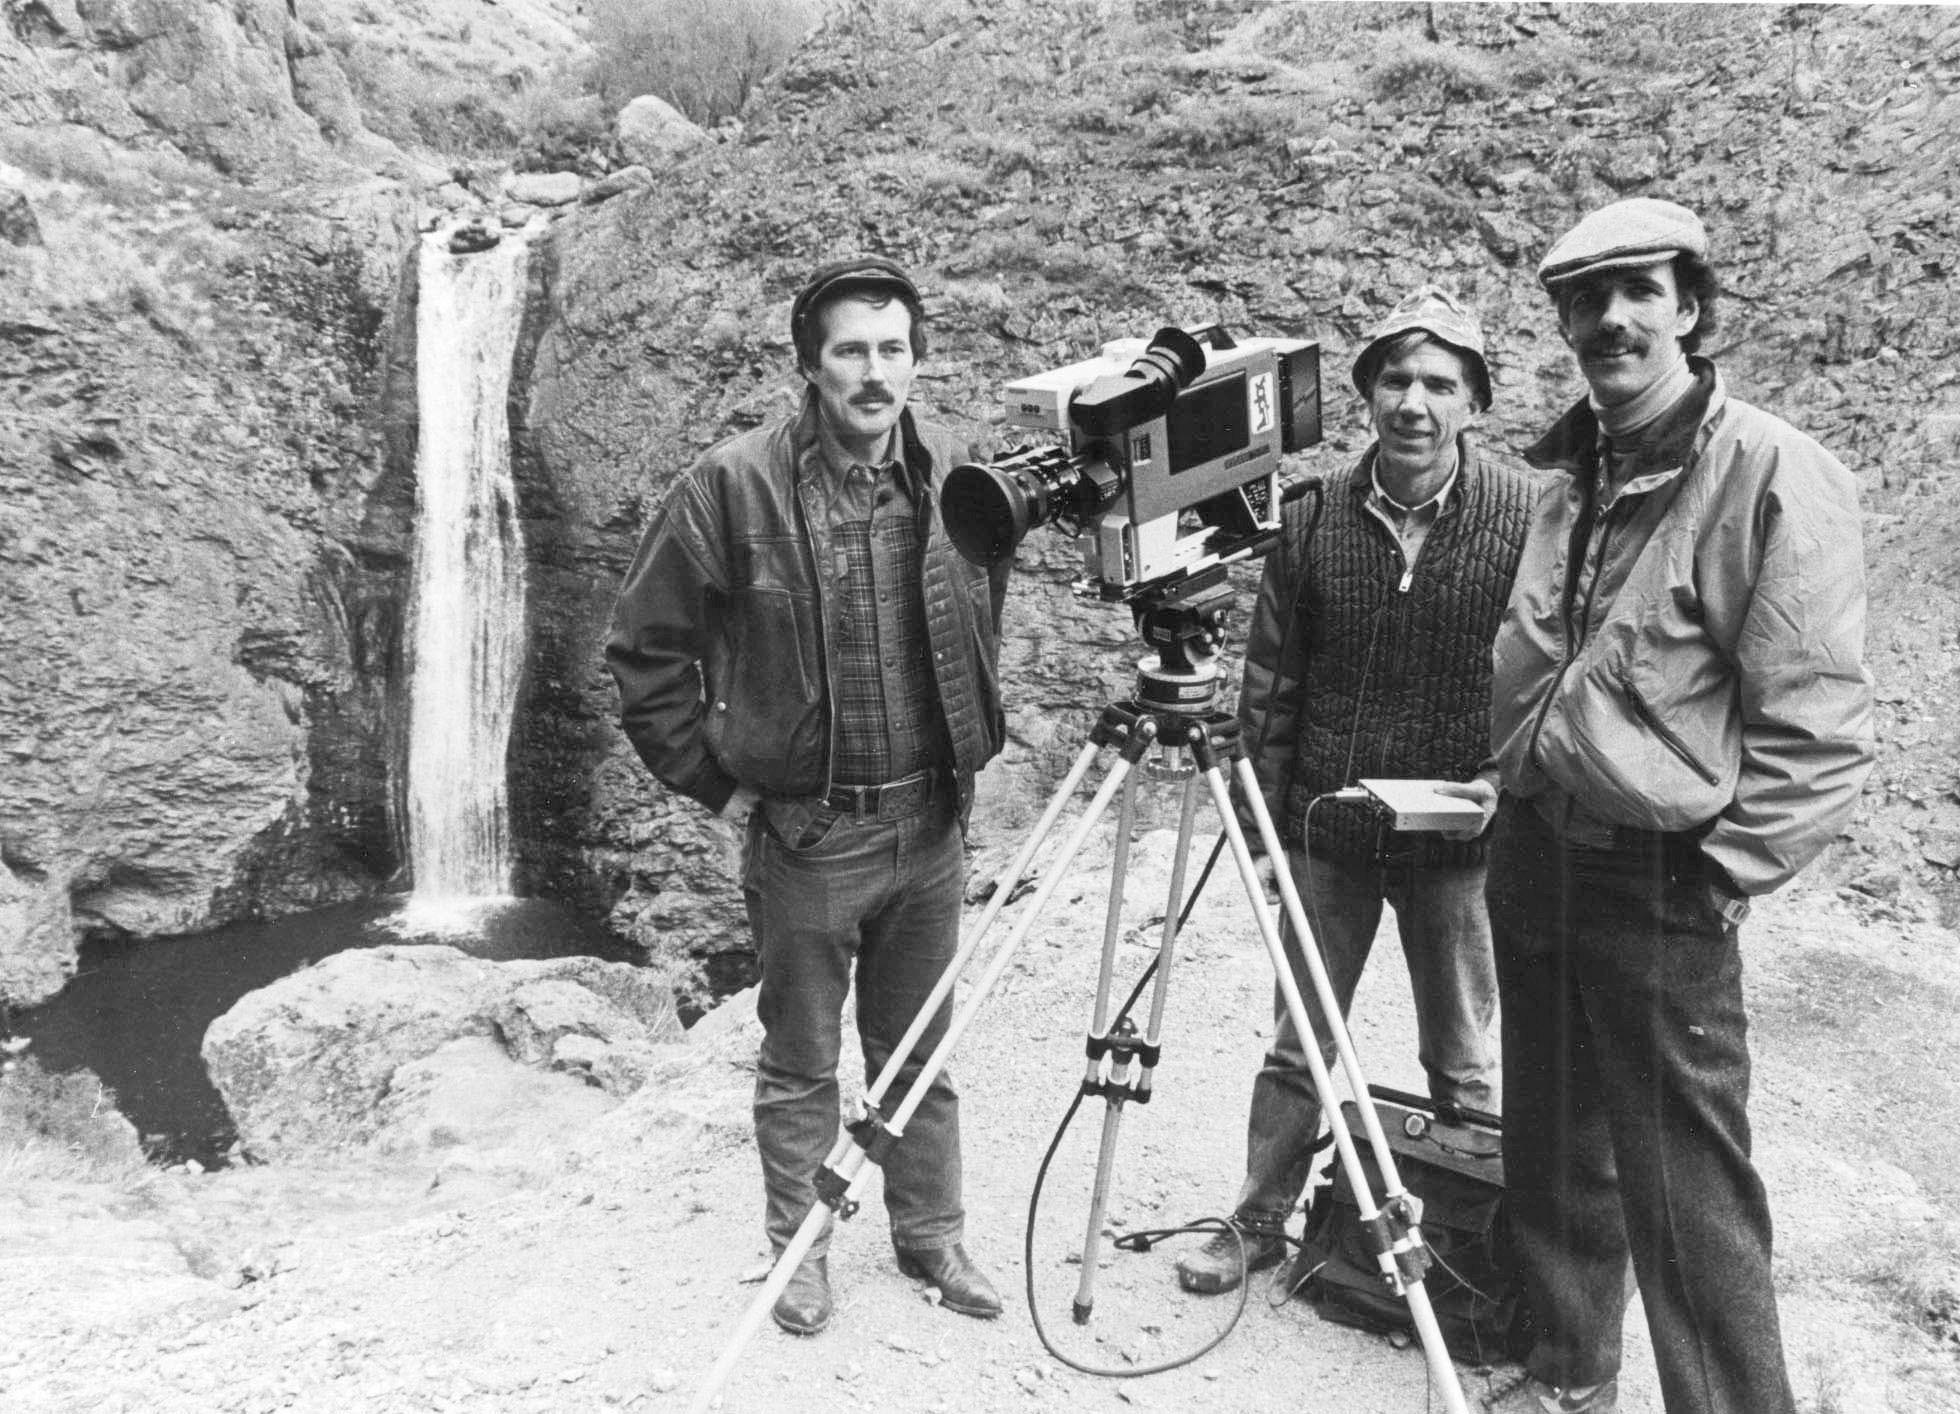 Three men standing next to a small waterfall with a video camera